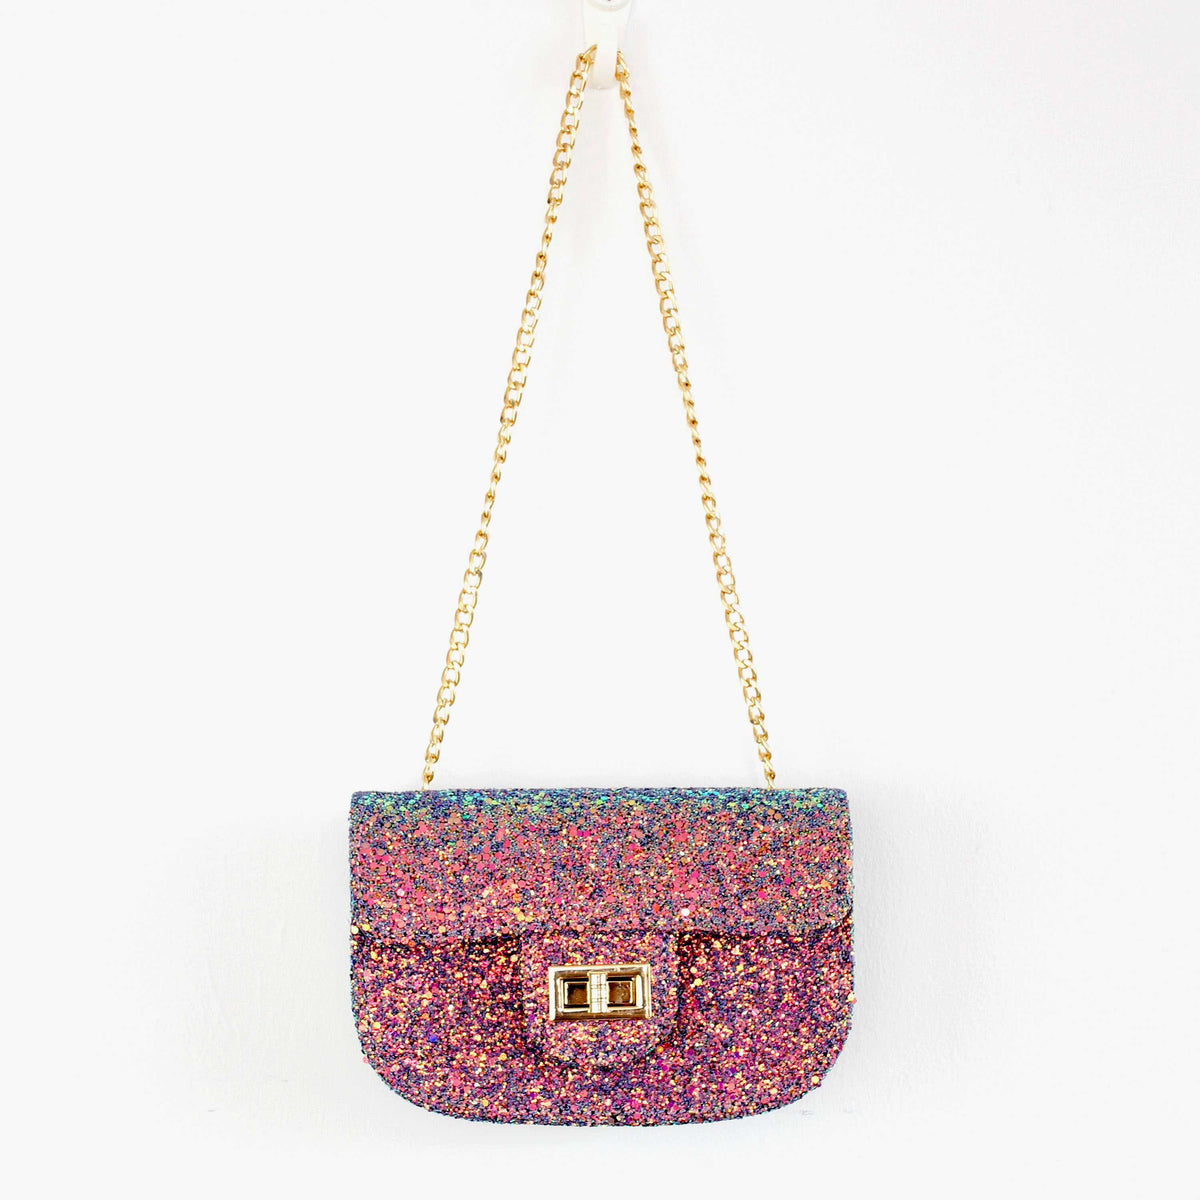 Reversible Sequined Chain Bag - worthtryit.com